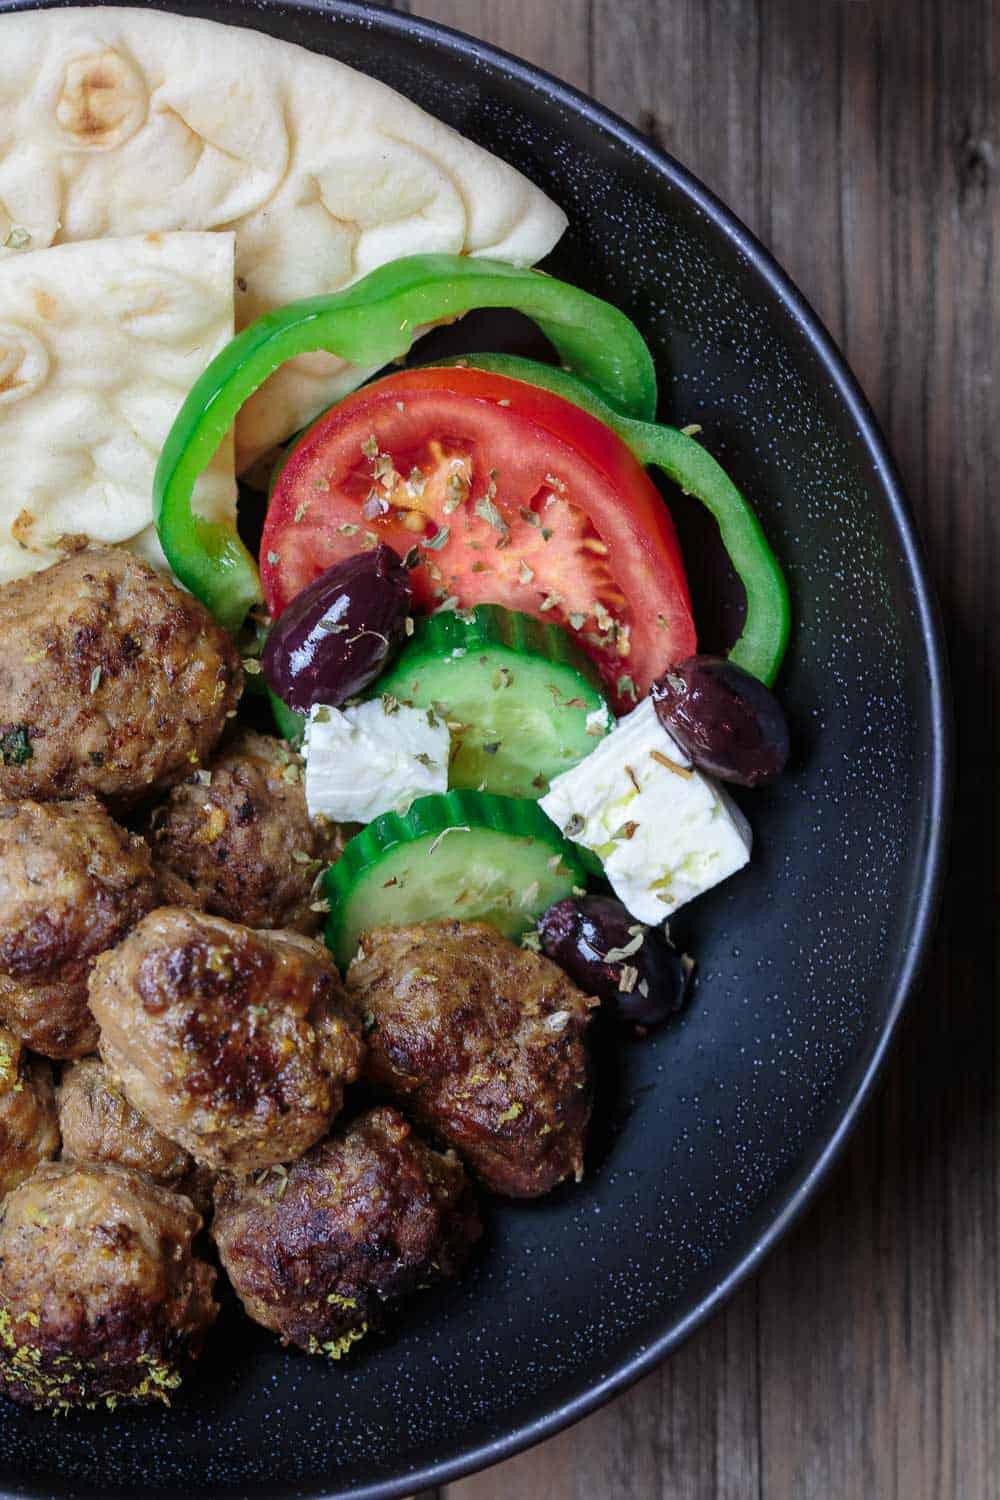 Keftedes Greek Meatballs Recipe | The Mediterranean Dish. Best Greek meatballs ever! Spiced with fresh mint, oregano and more, pan-fried in olive oil then finished with a thick lemony sauce. Serve it with pita and Greek salad and you've got an amazing Greek dinner! See the easy recipe on TheMediterraneanDish.com #greekmeatballs #meatballs #meatballrecipe #greekfood #greekrecipe 